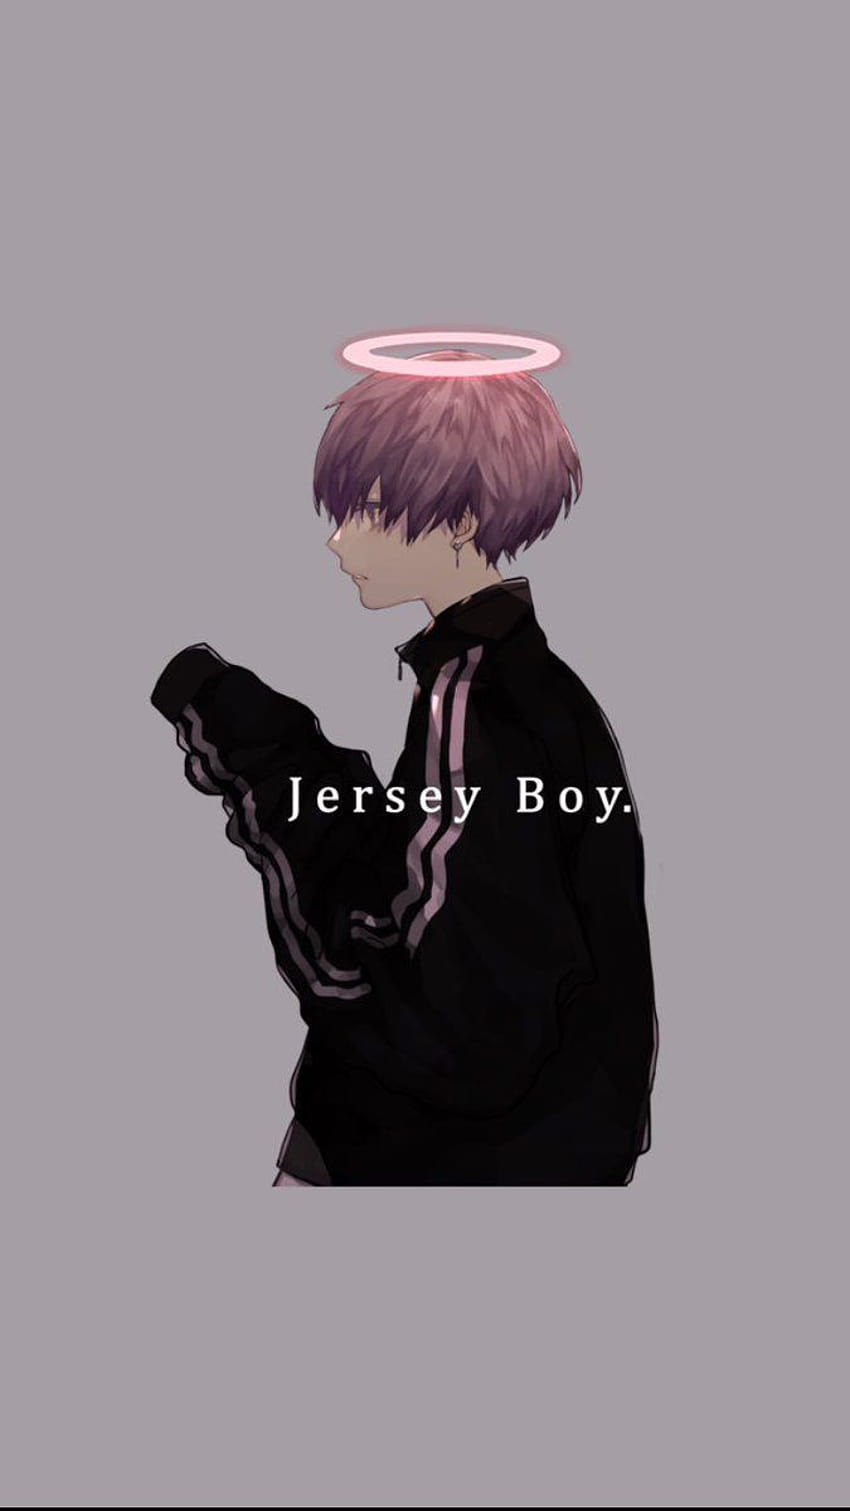 Bad Anime Boy Wallpapers Top 10 Best Bad Anime Boy iPhone Wallpapers  HQ 